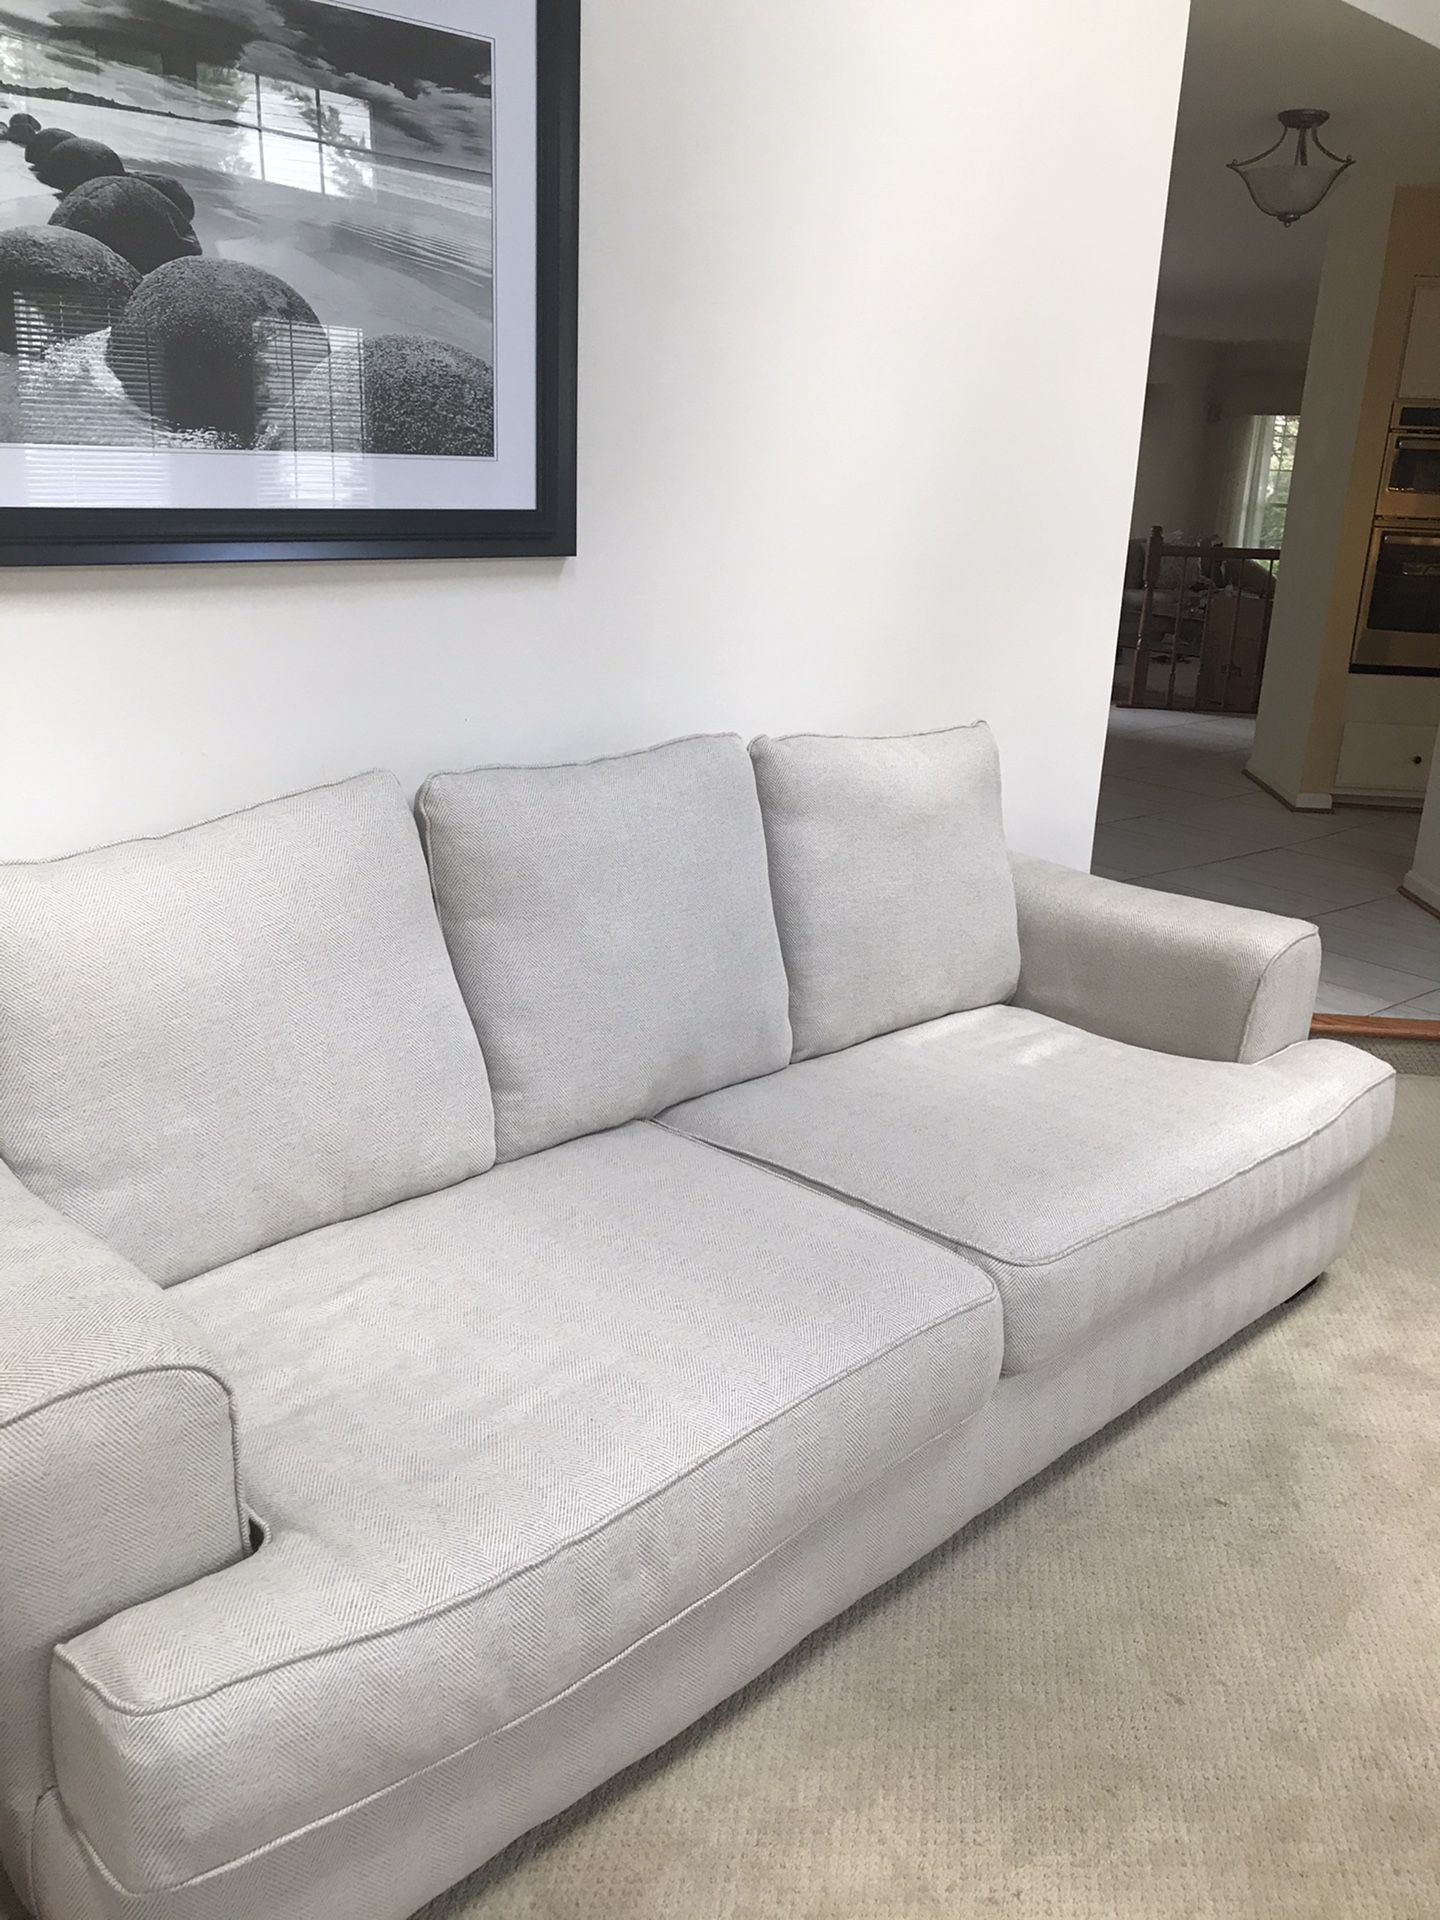 Sofa with large I am chair excellent condition six months old